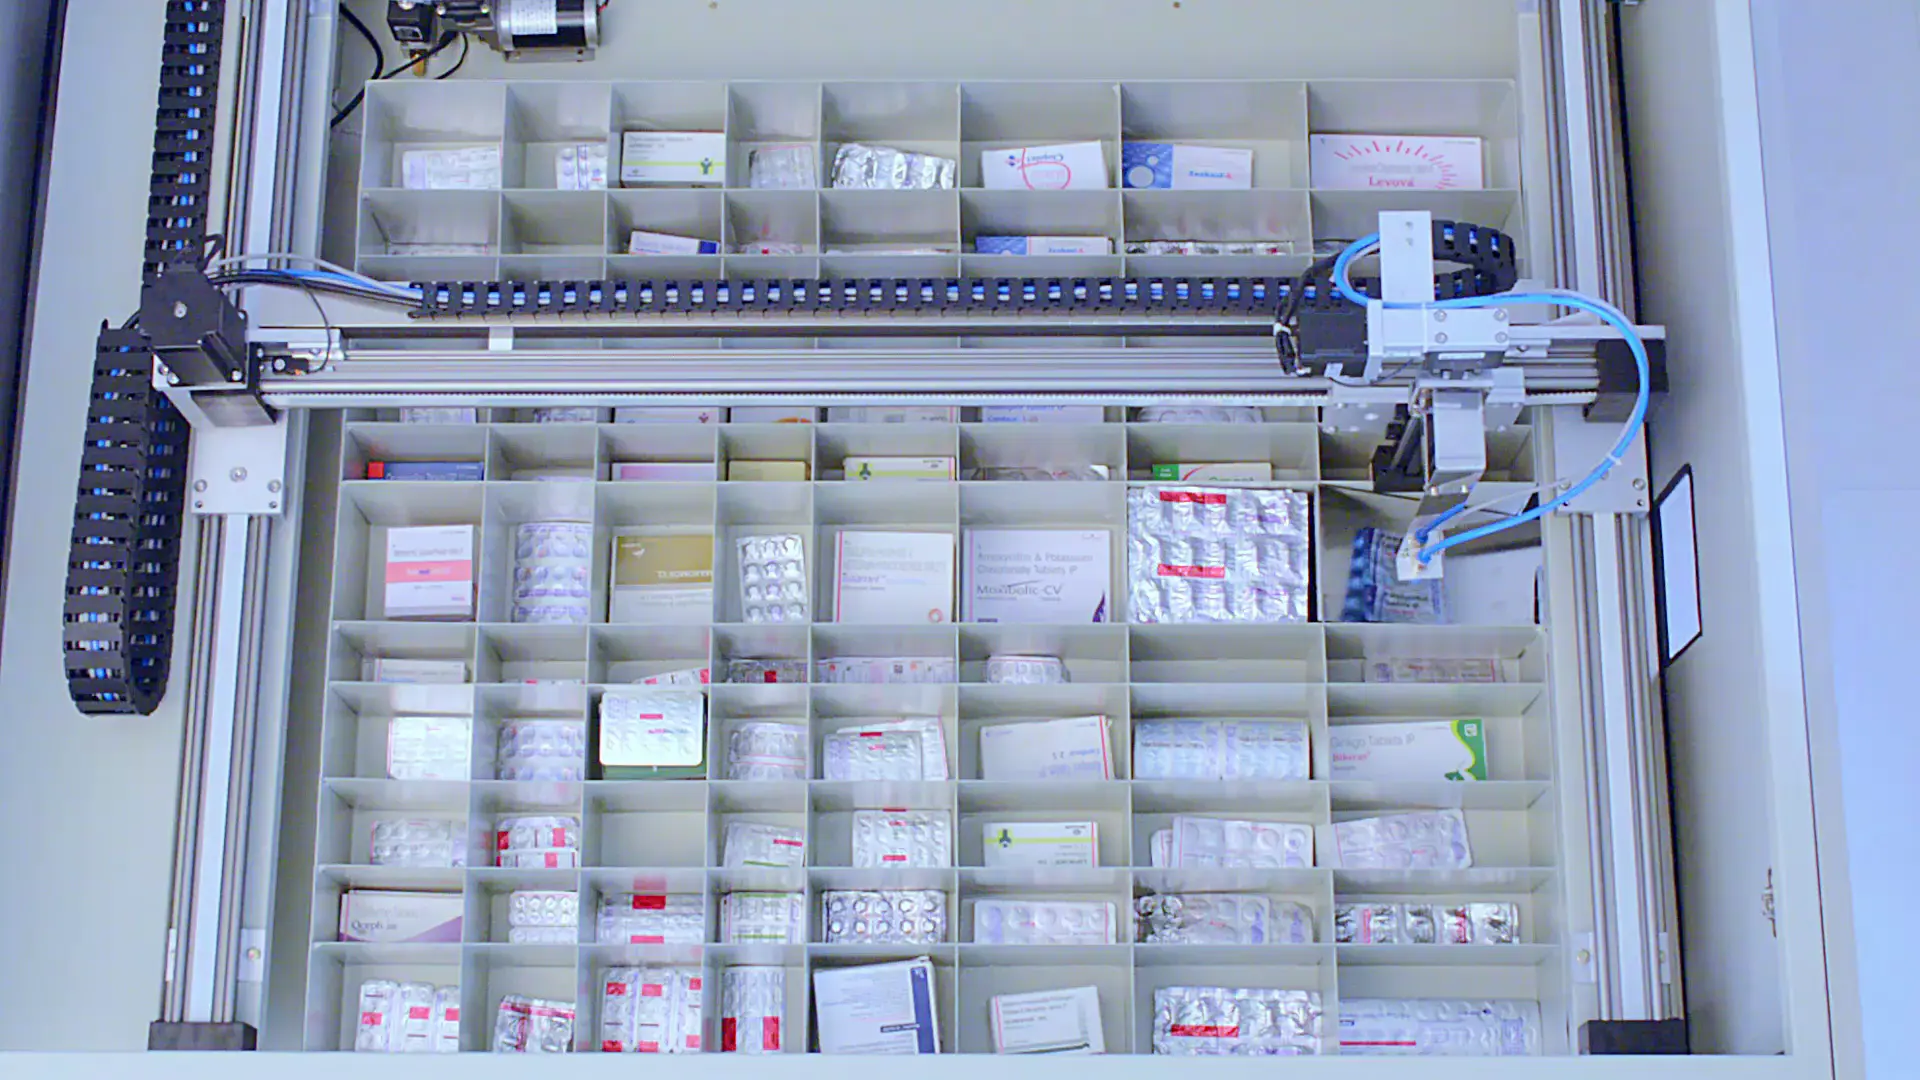 Automatic dispensing system for pharmacies